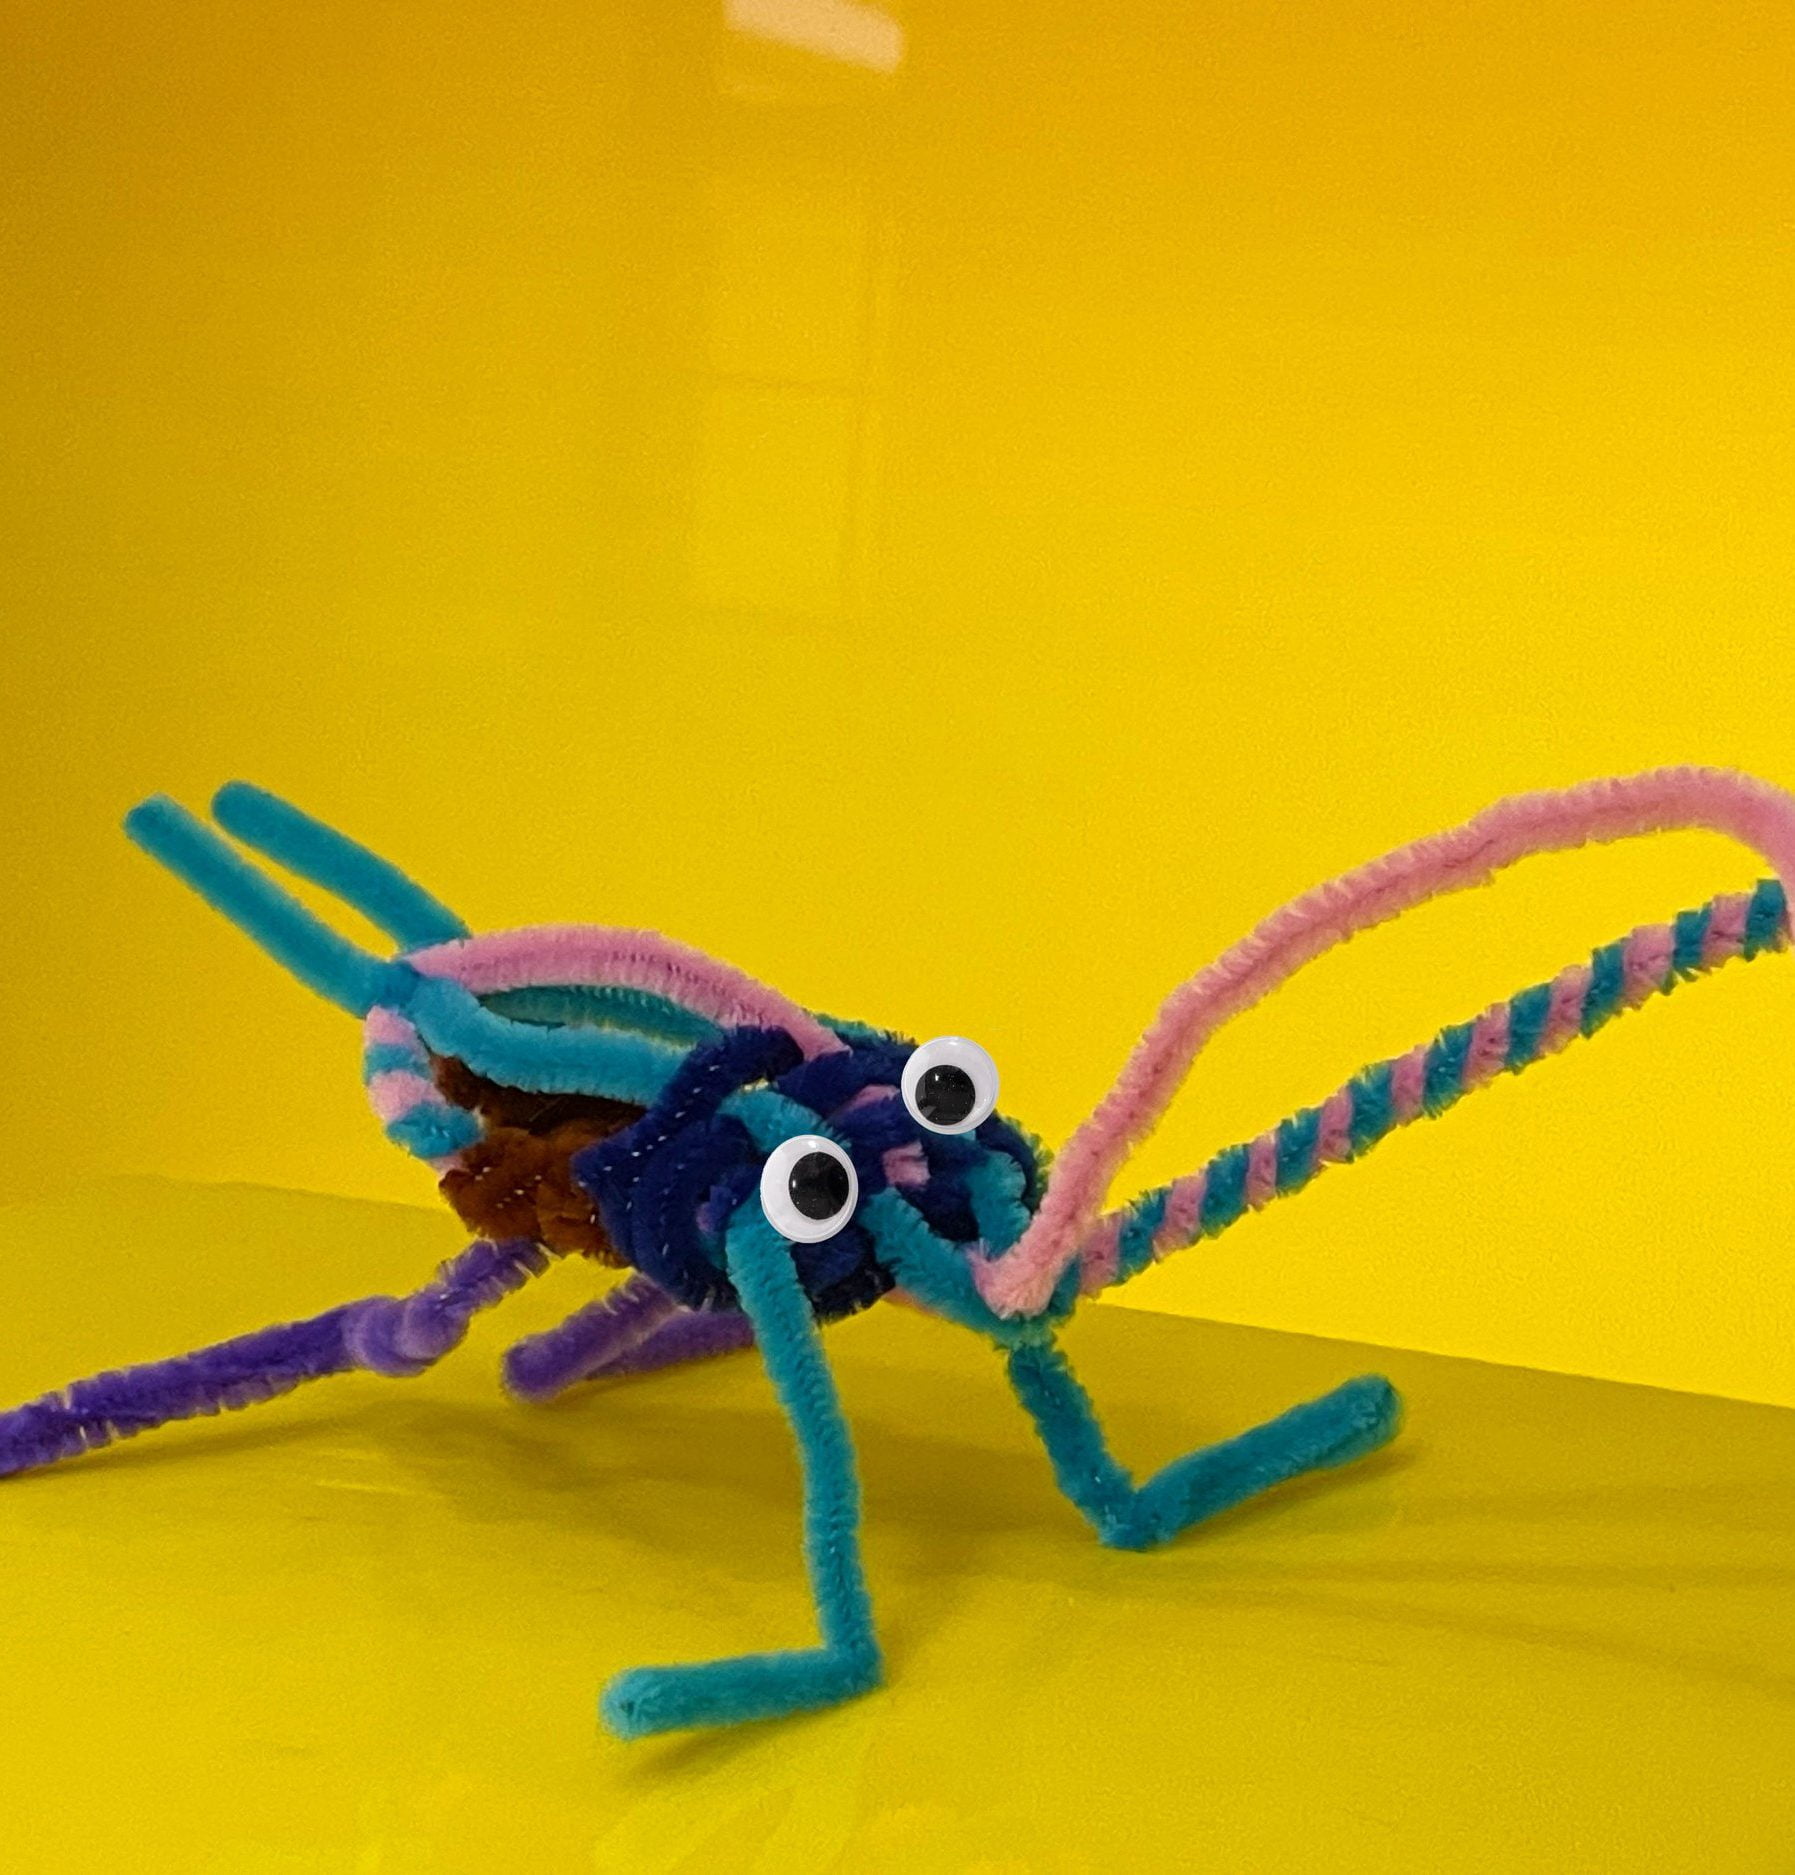 Pipe cleaner bug on a yellow backdrop.